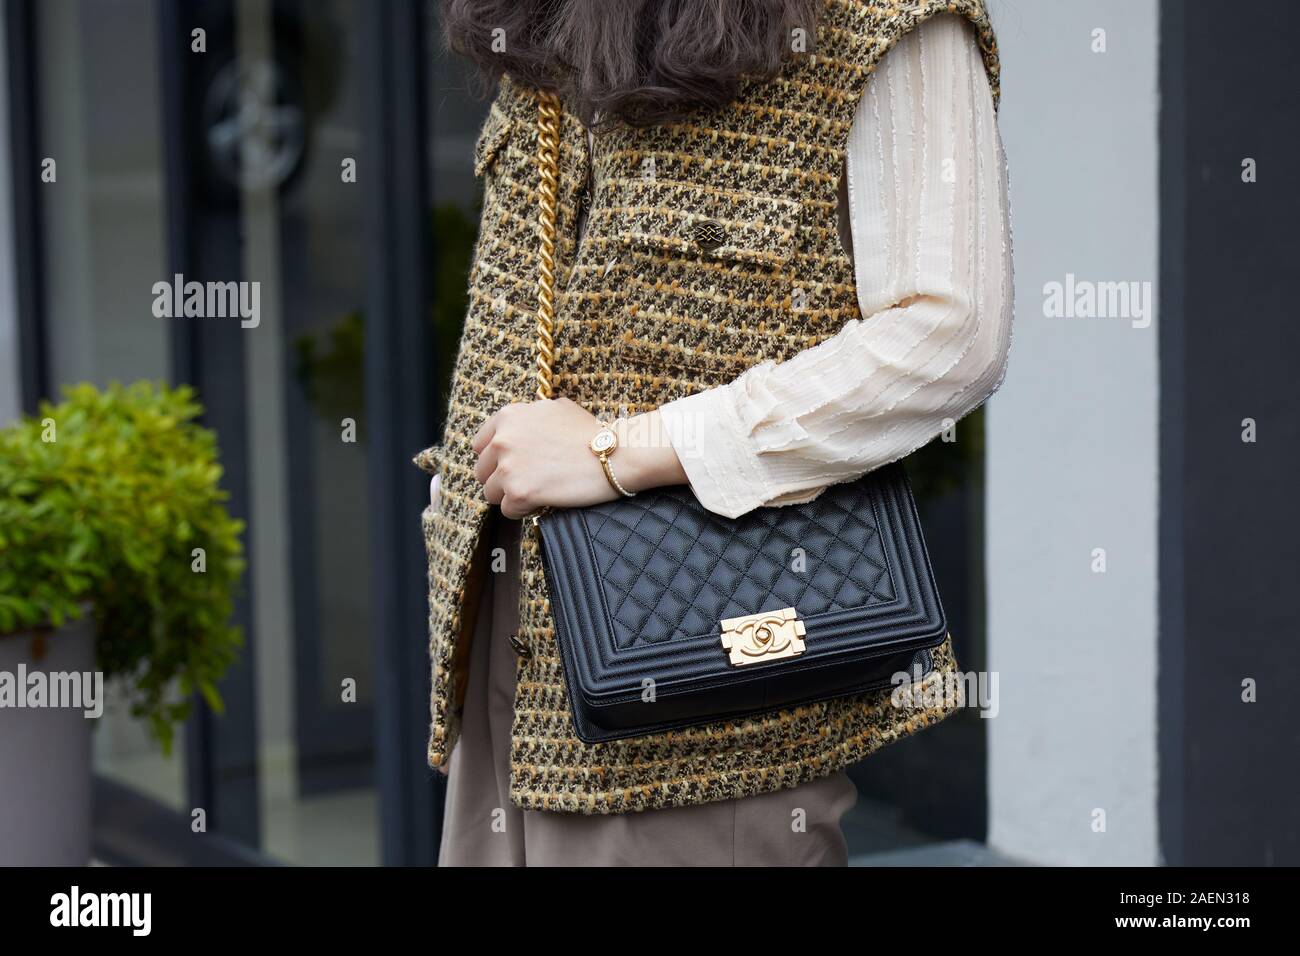 MILAN, ITALY - SEPTEMBER 22, 2019: Woman with black Chanel leather